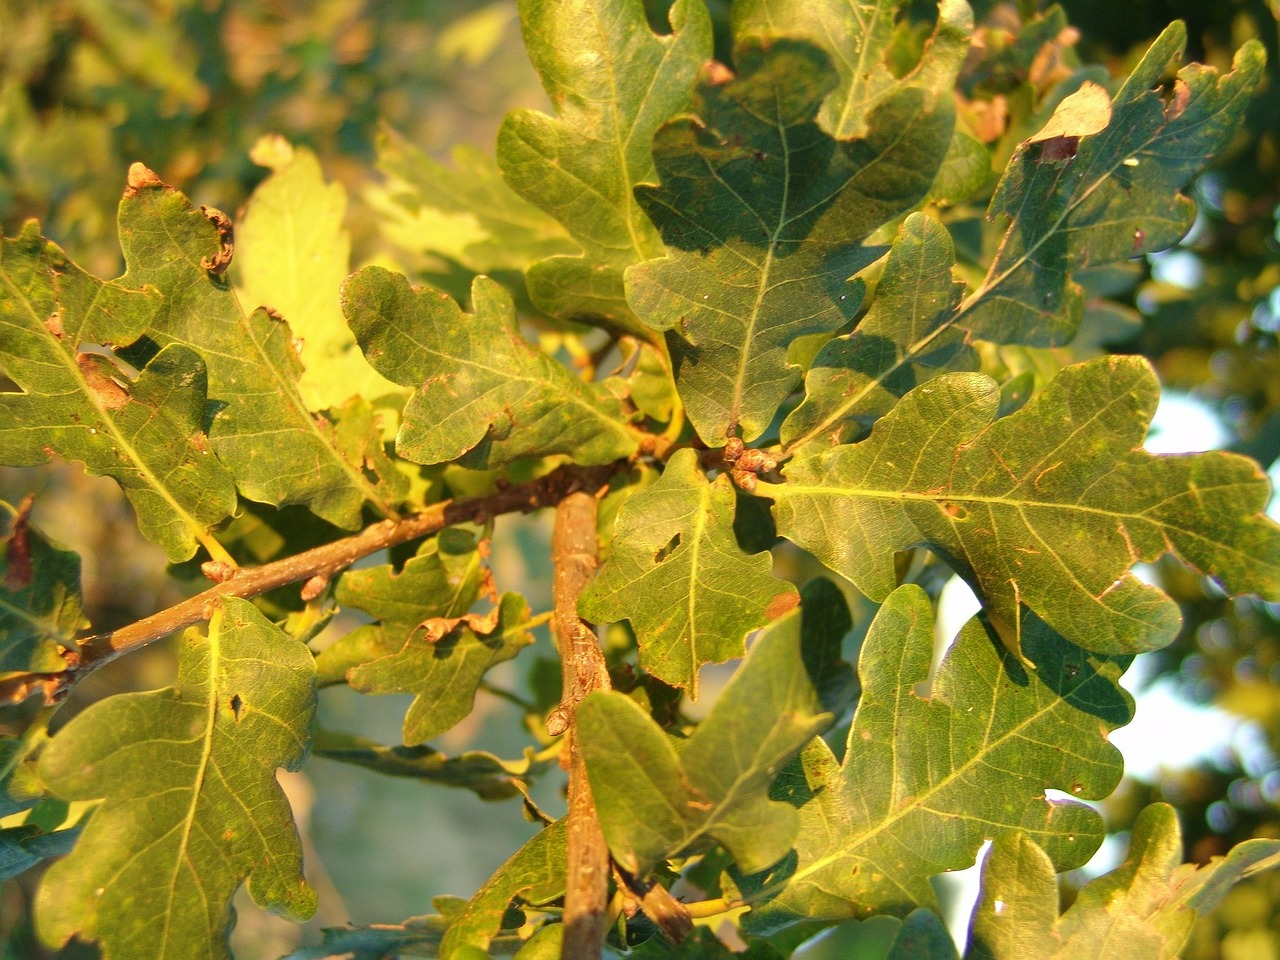 oak,oak leaves,acorns,leaves,free pictures, free photos, free images, royalty free, free illustrations, public domain